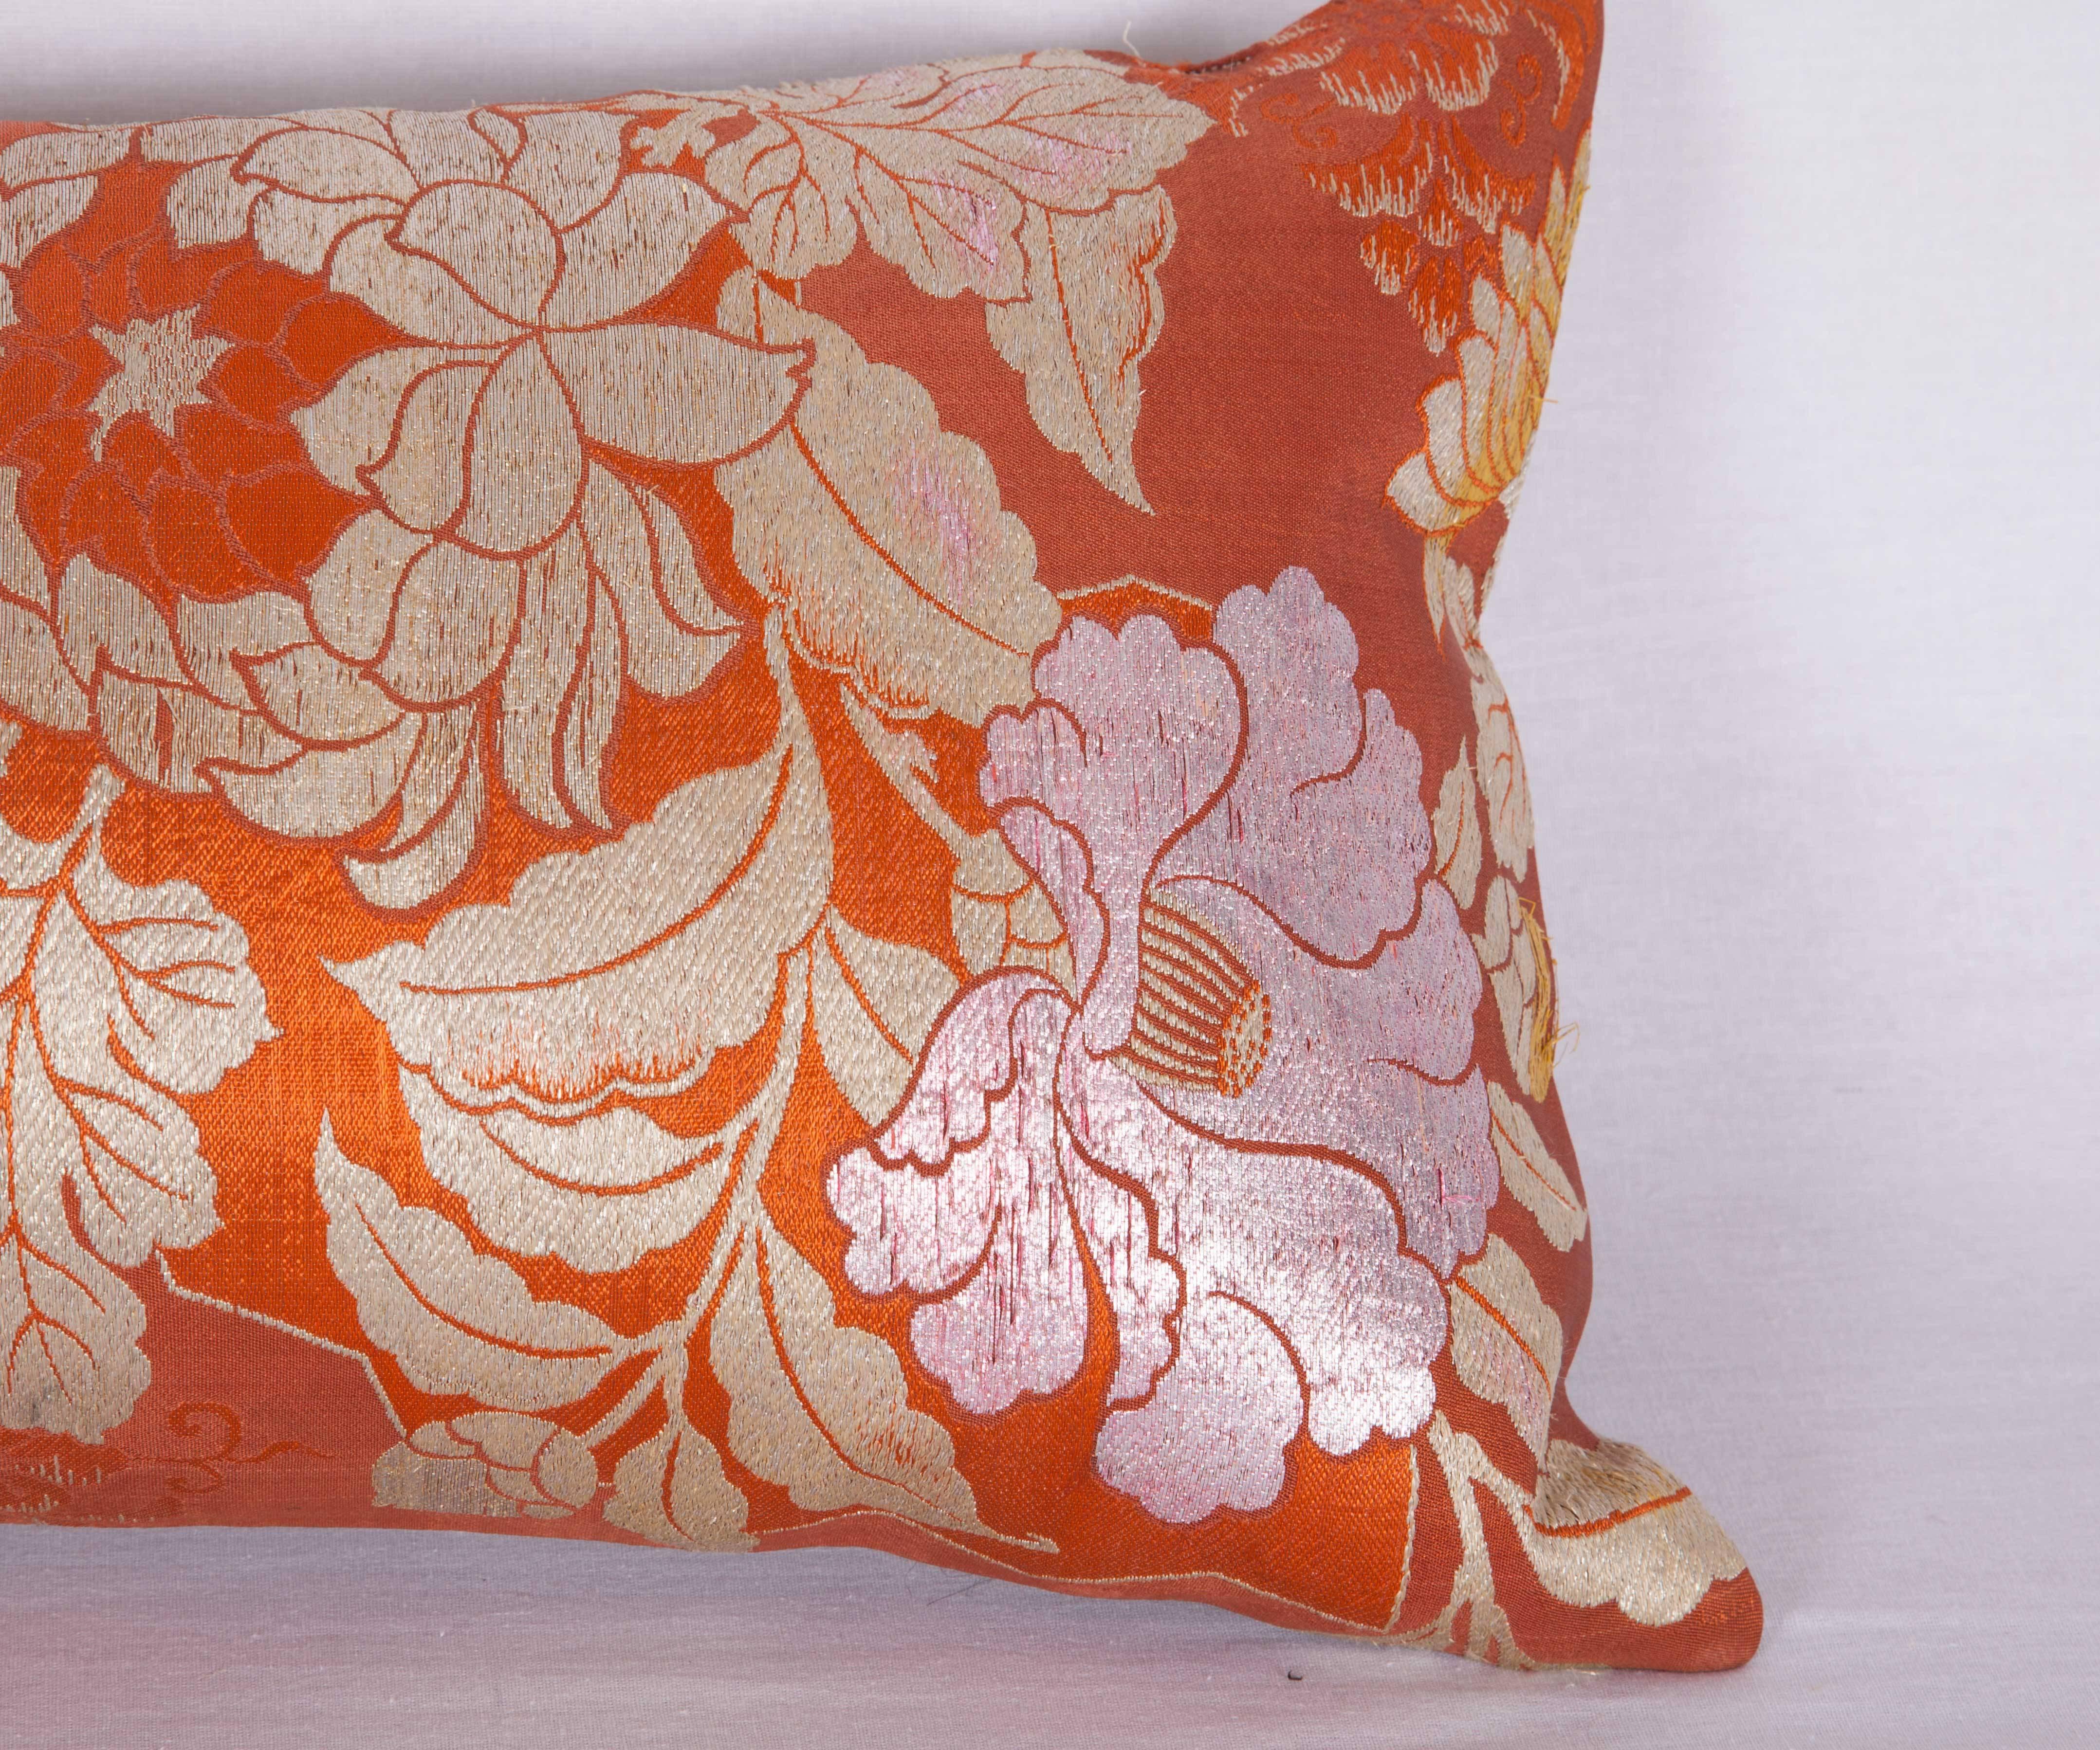 Hand-Woven Pillow Made Out of a Japanese, Mid-20th Century Obi